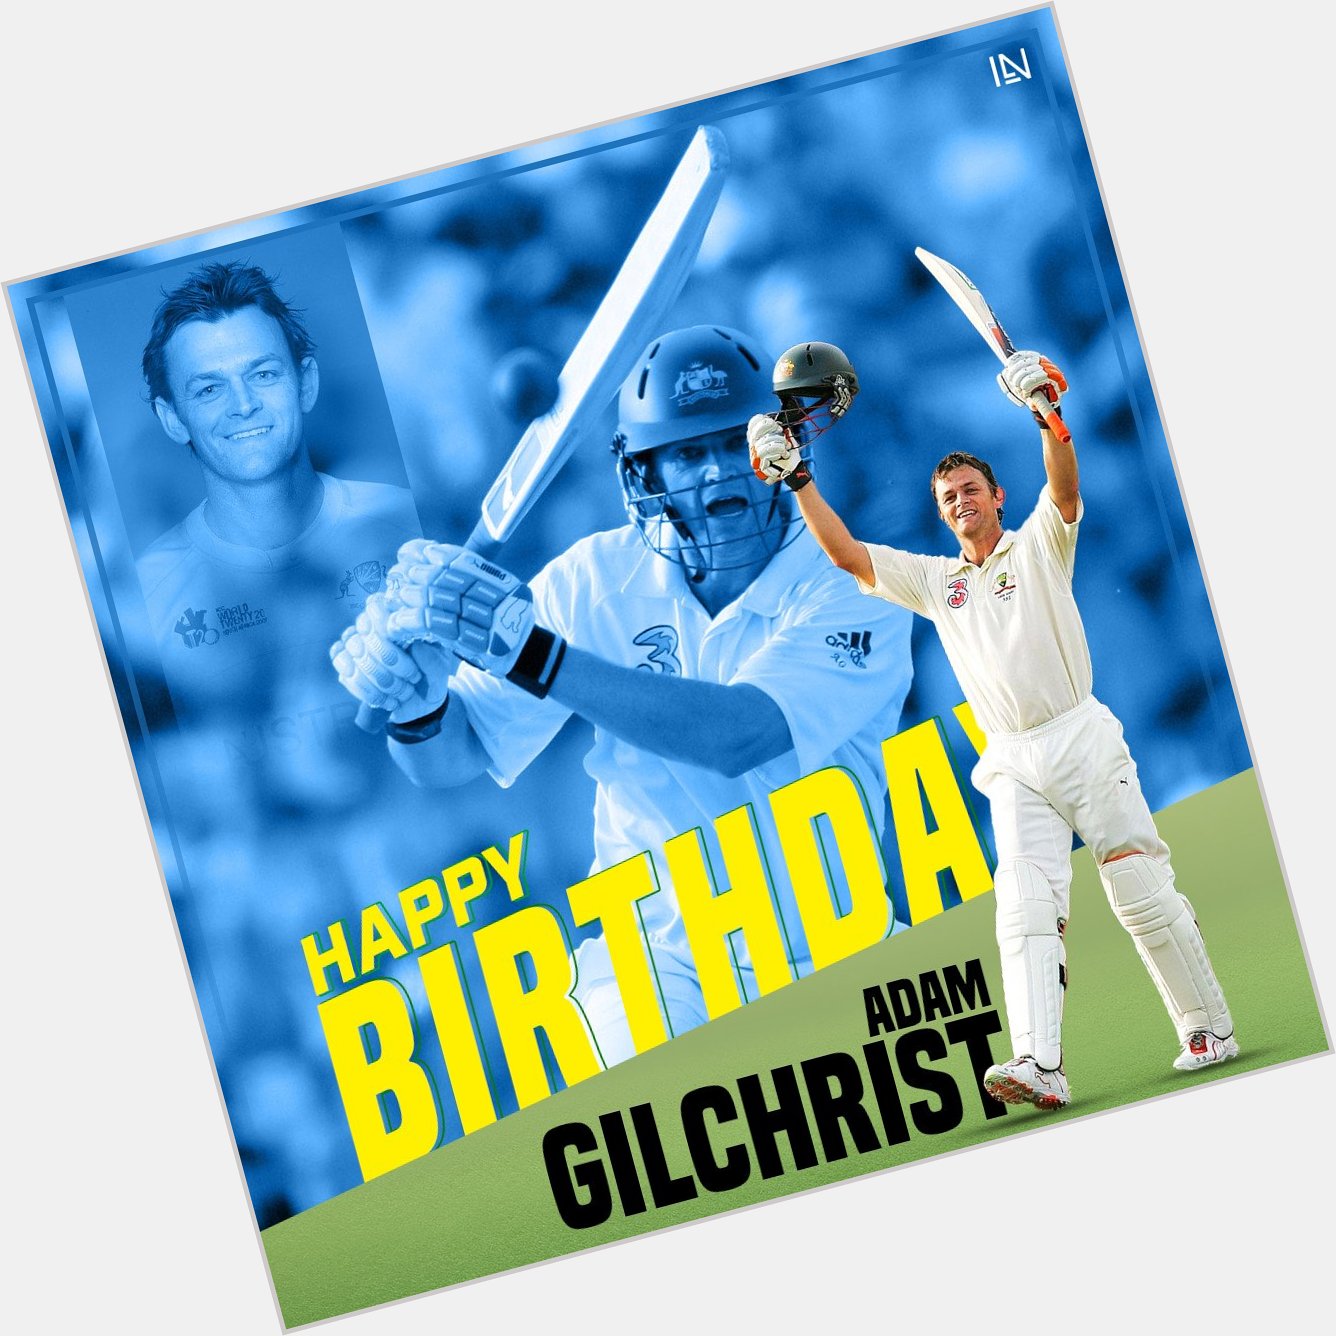  Three-time World Cup winner The first to hit 100 Test sixes

Happy Birthday to legend Adam Gilchrist 